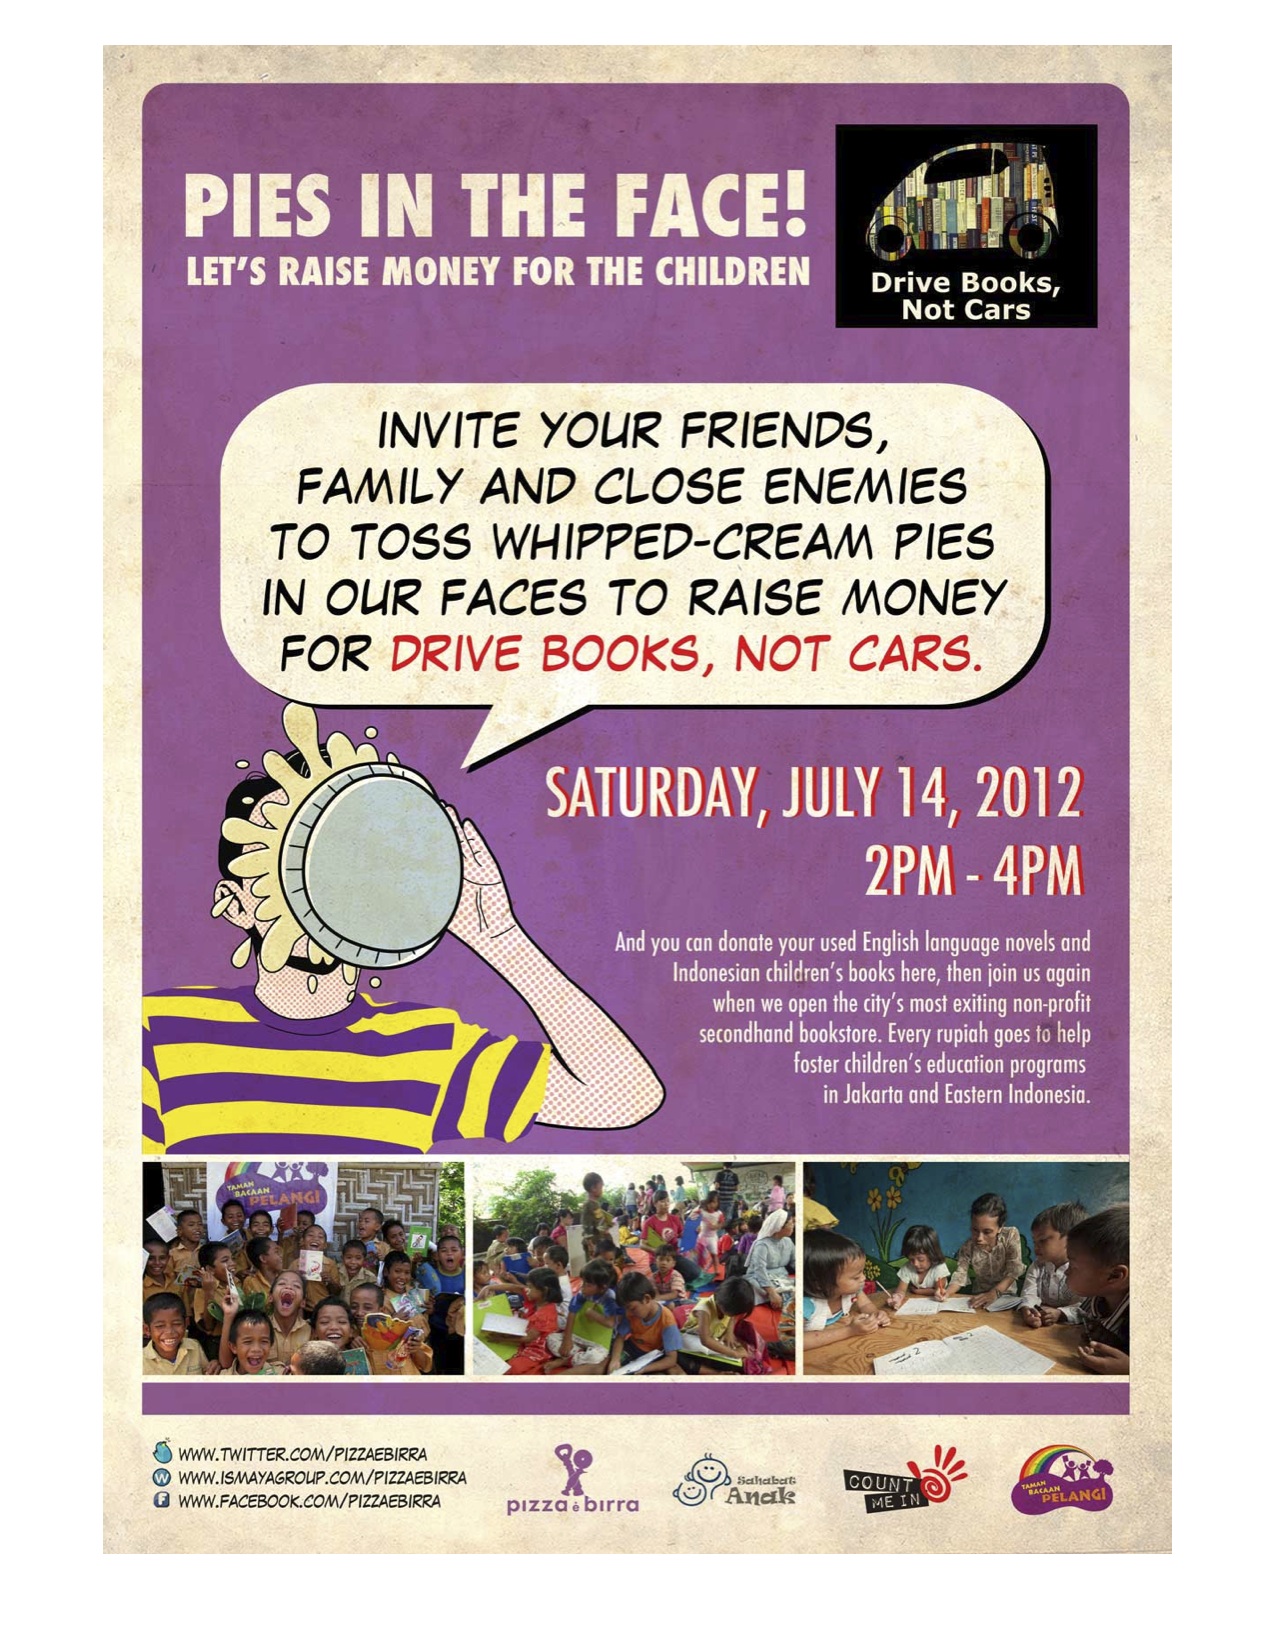 Pies In The Face!